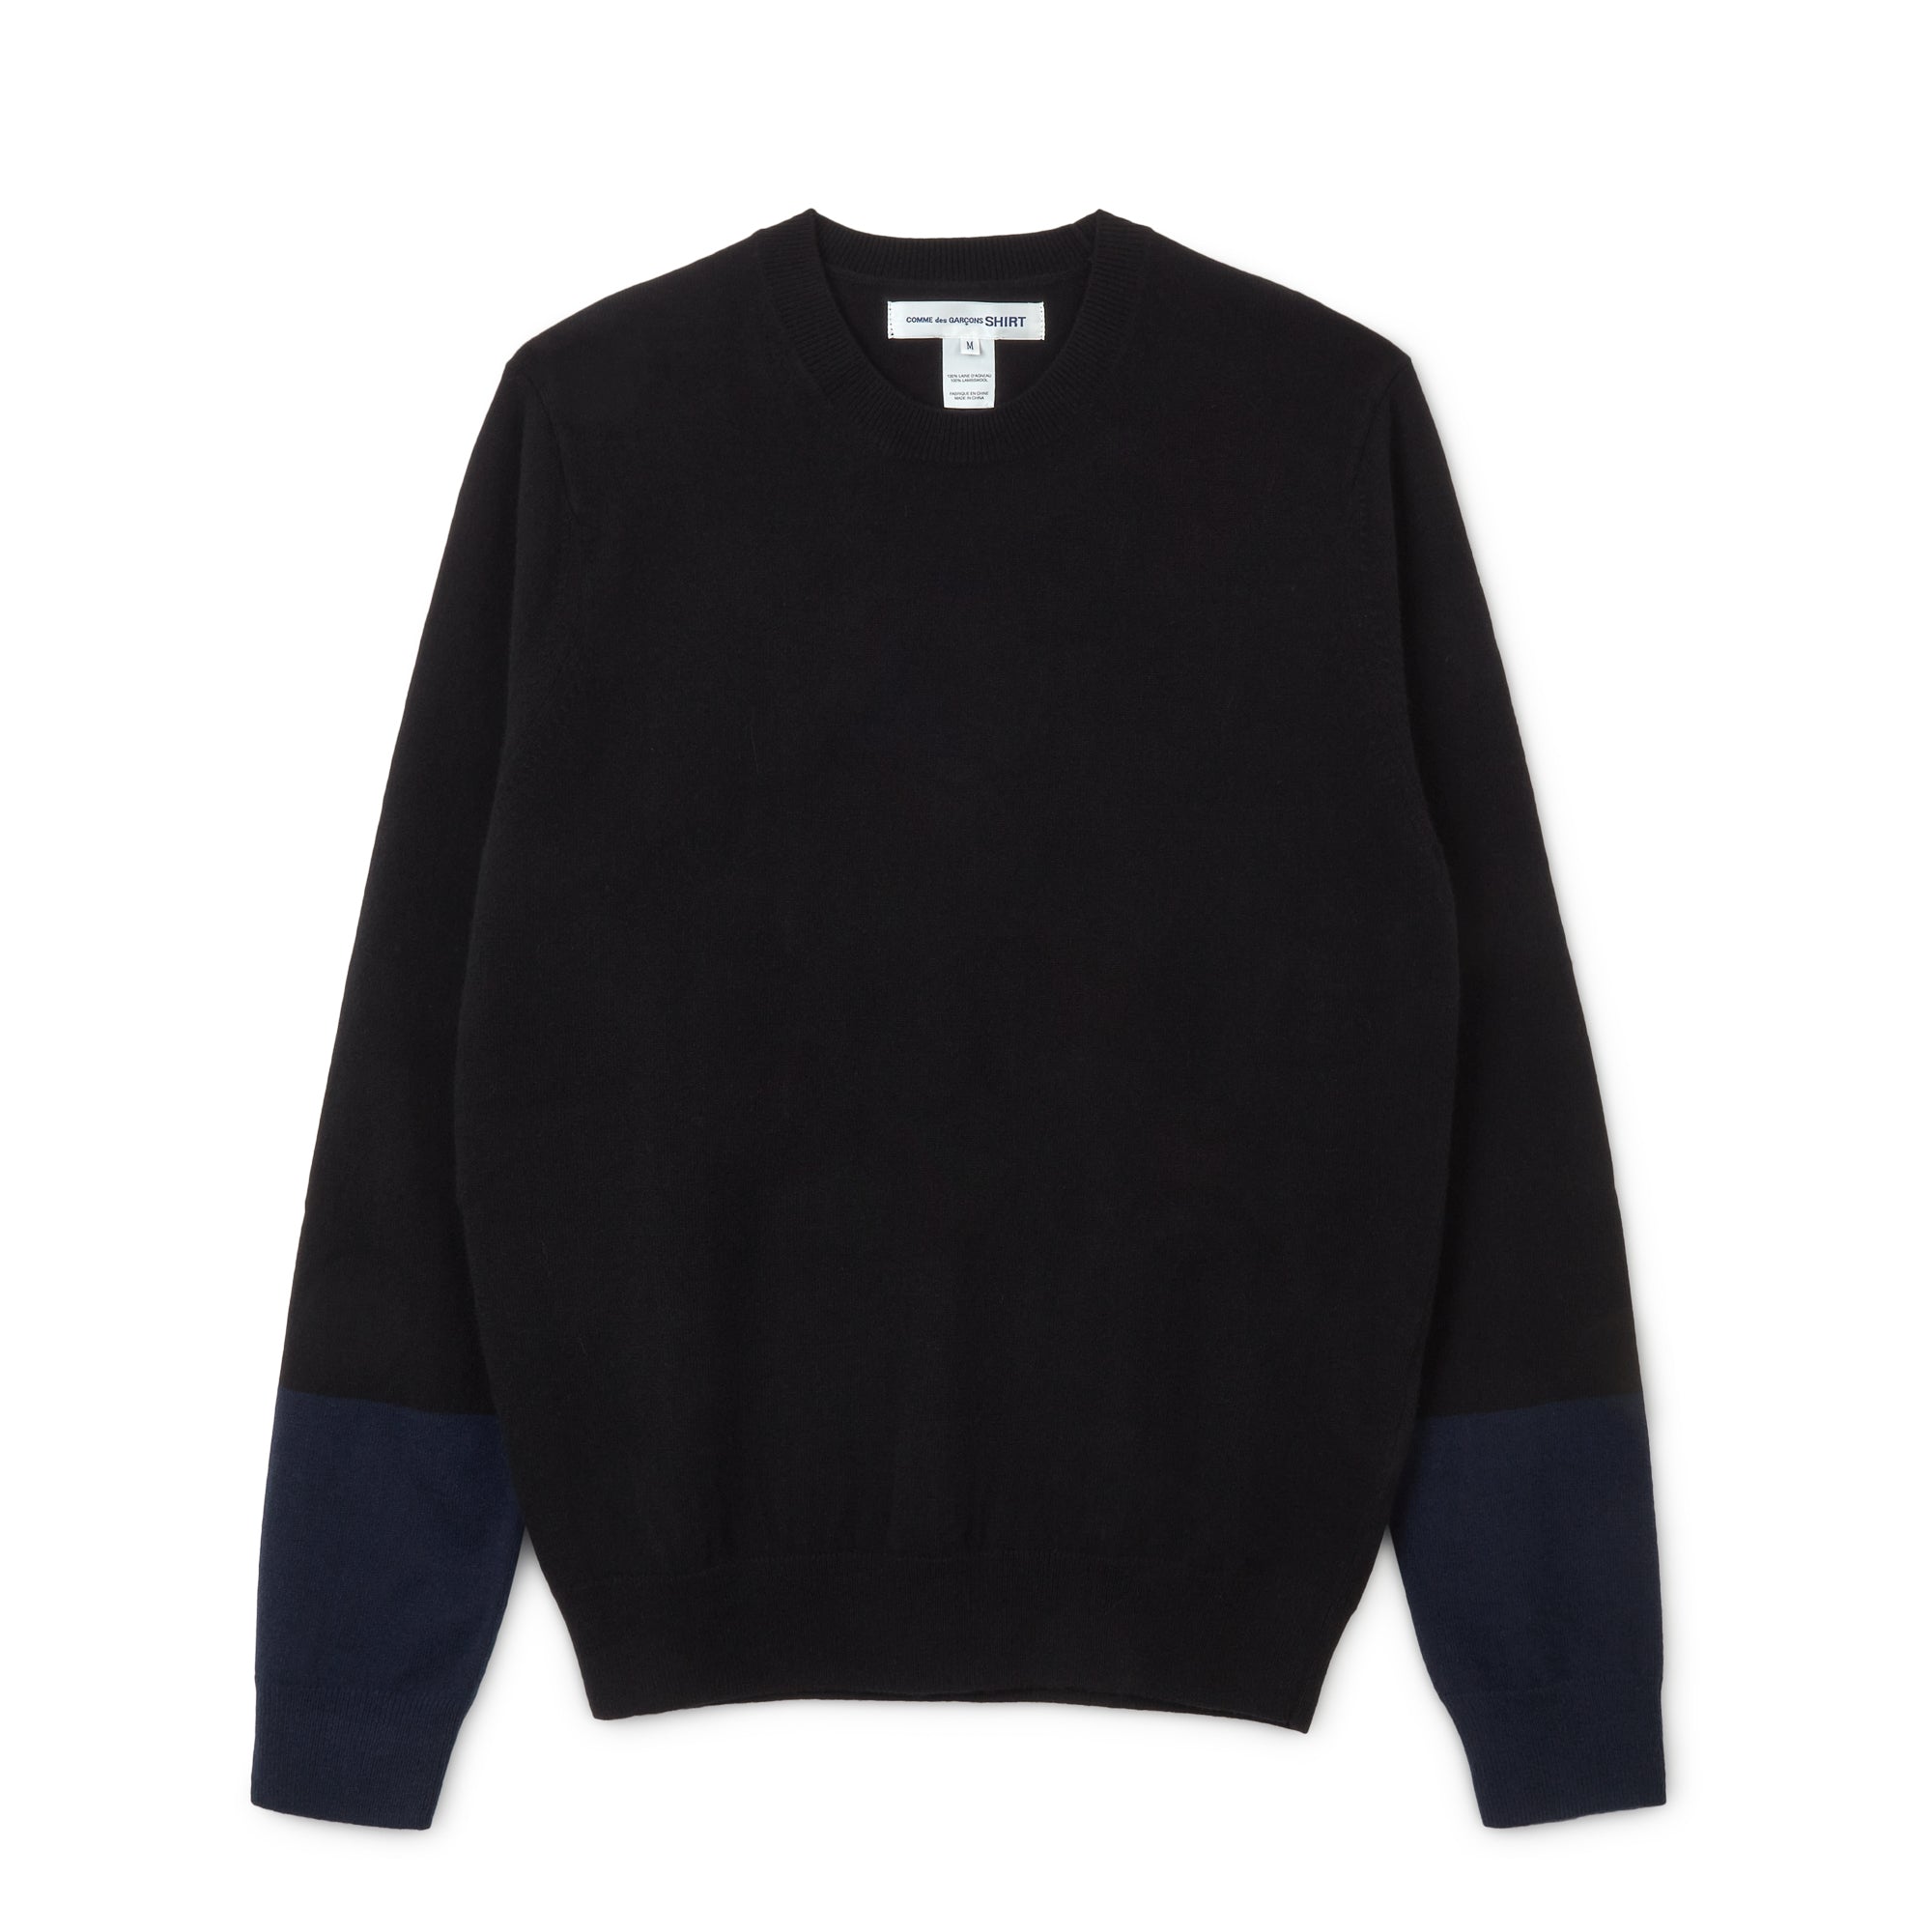 CDG Shirt Forever - Round Neck Contrast Jumper - (Black/Navy) view 1